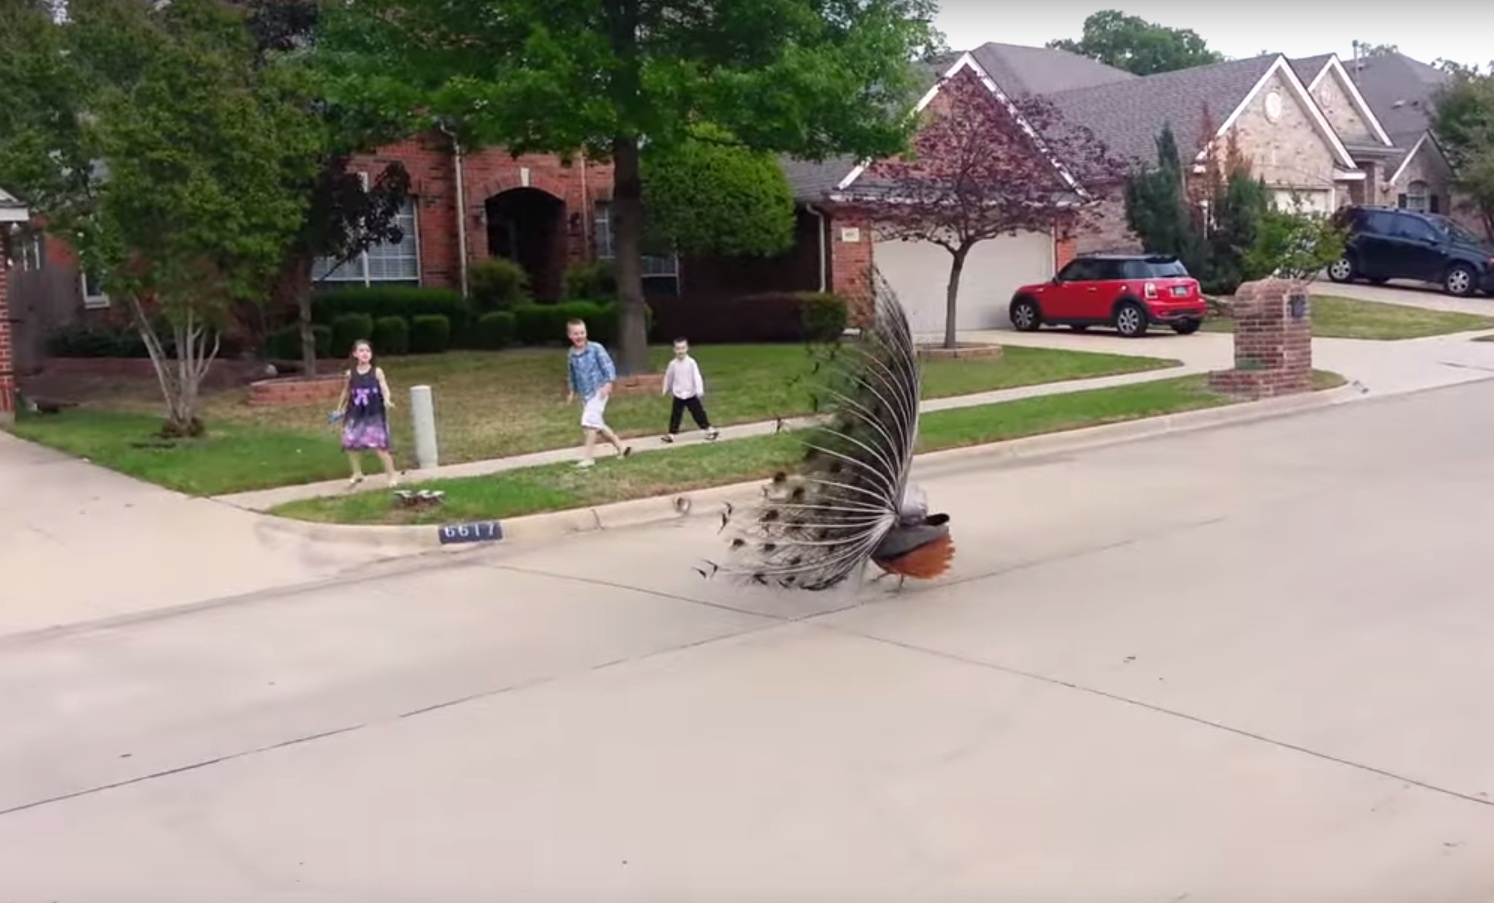 Angry peacock scares kids